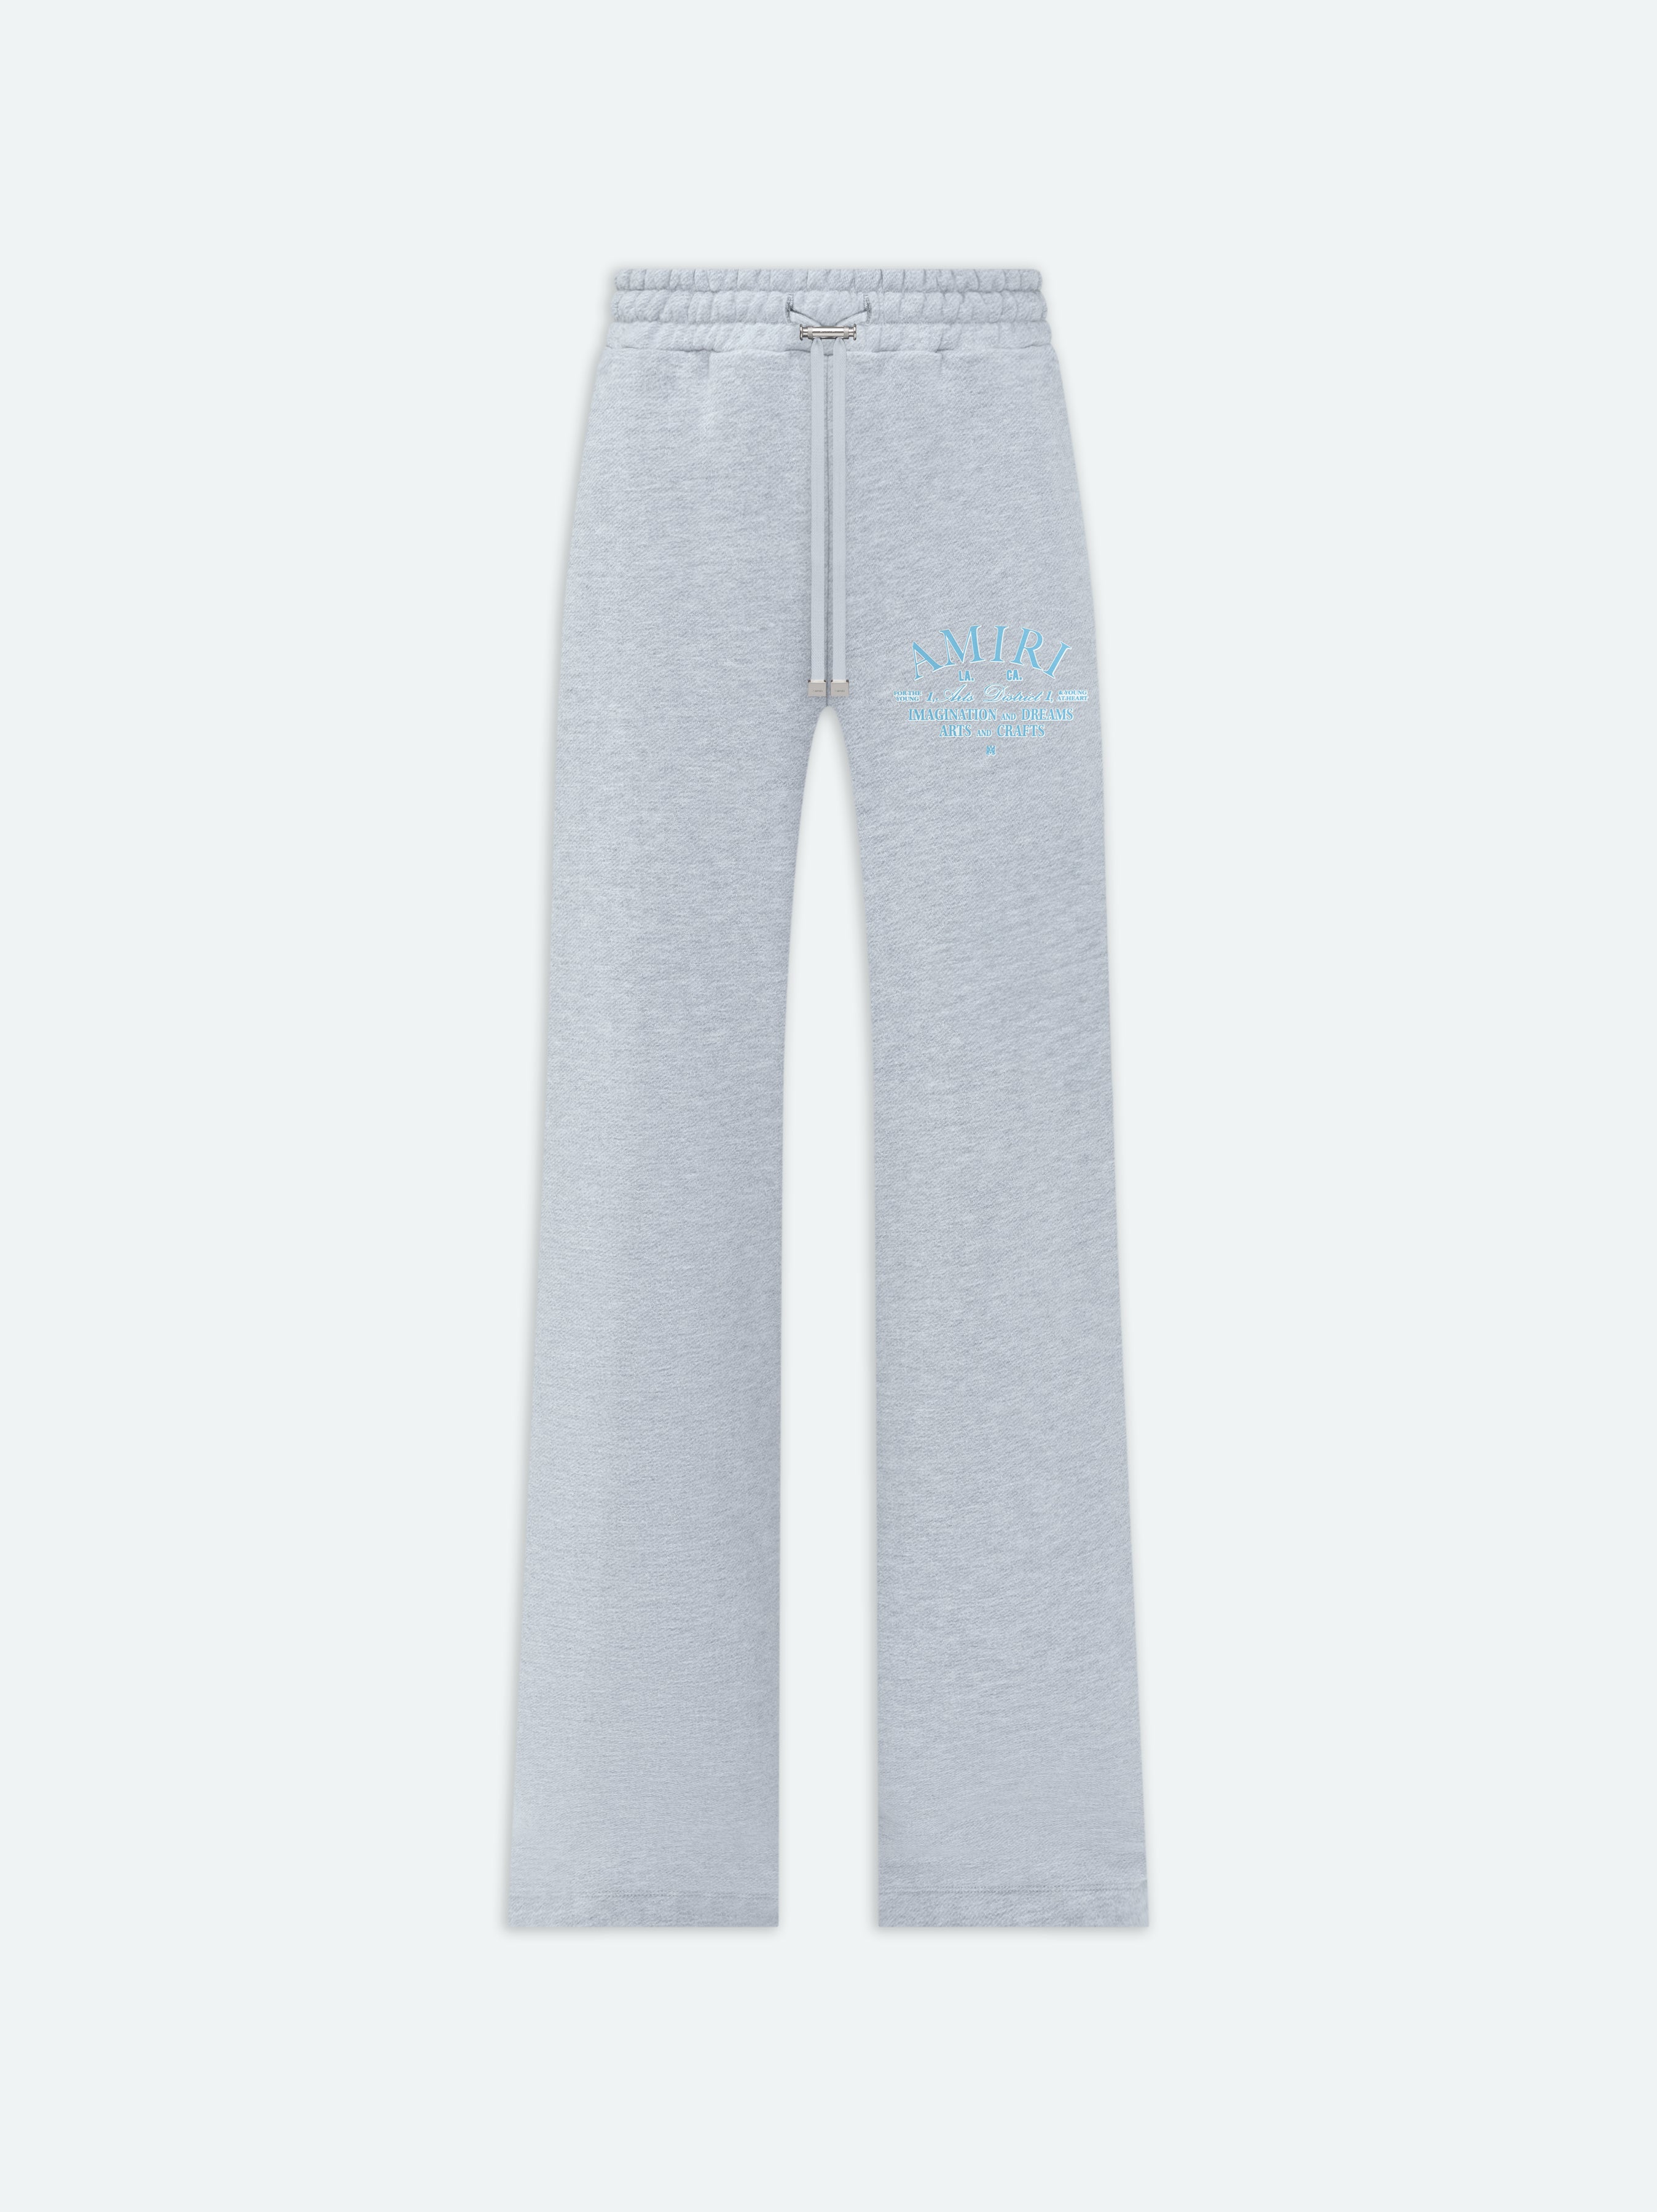 Product WOMEN - AMIRI ARTS DISTRICT BAGGY SWEATPANT - Heather Grey featured image